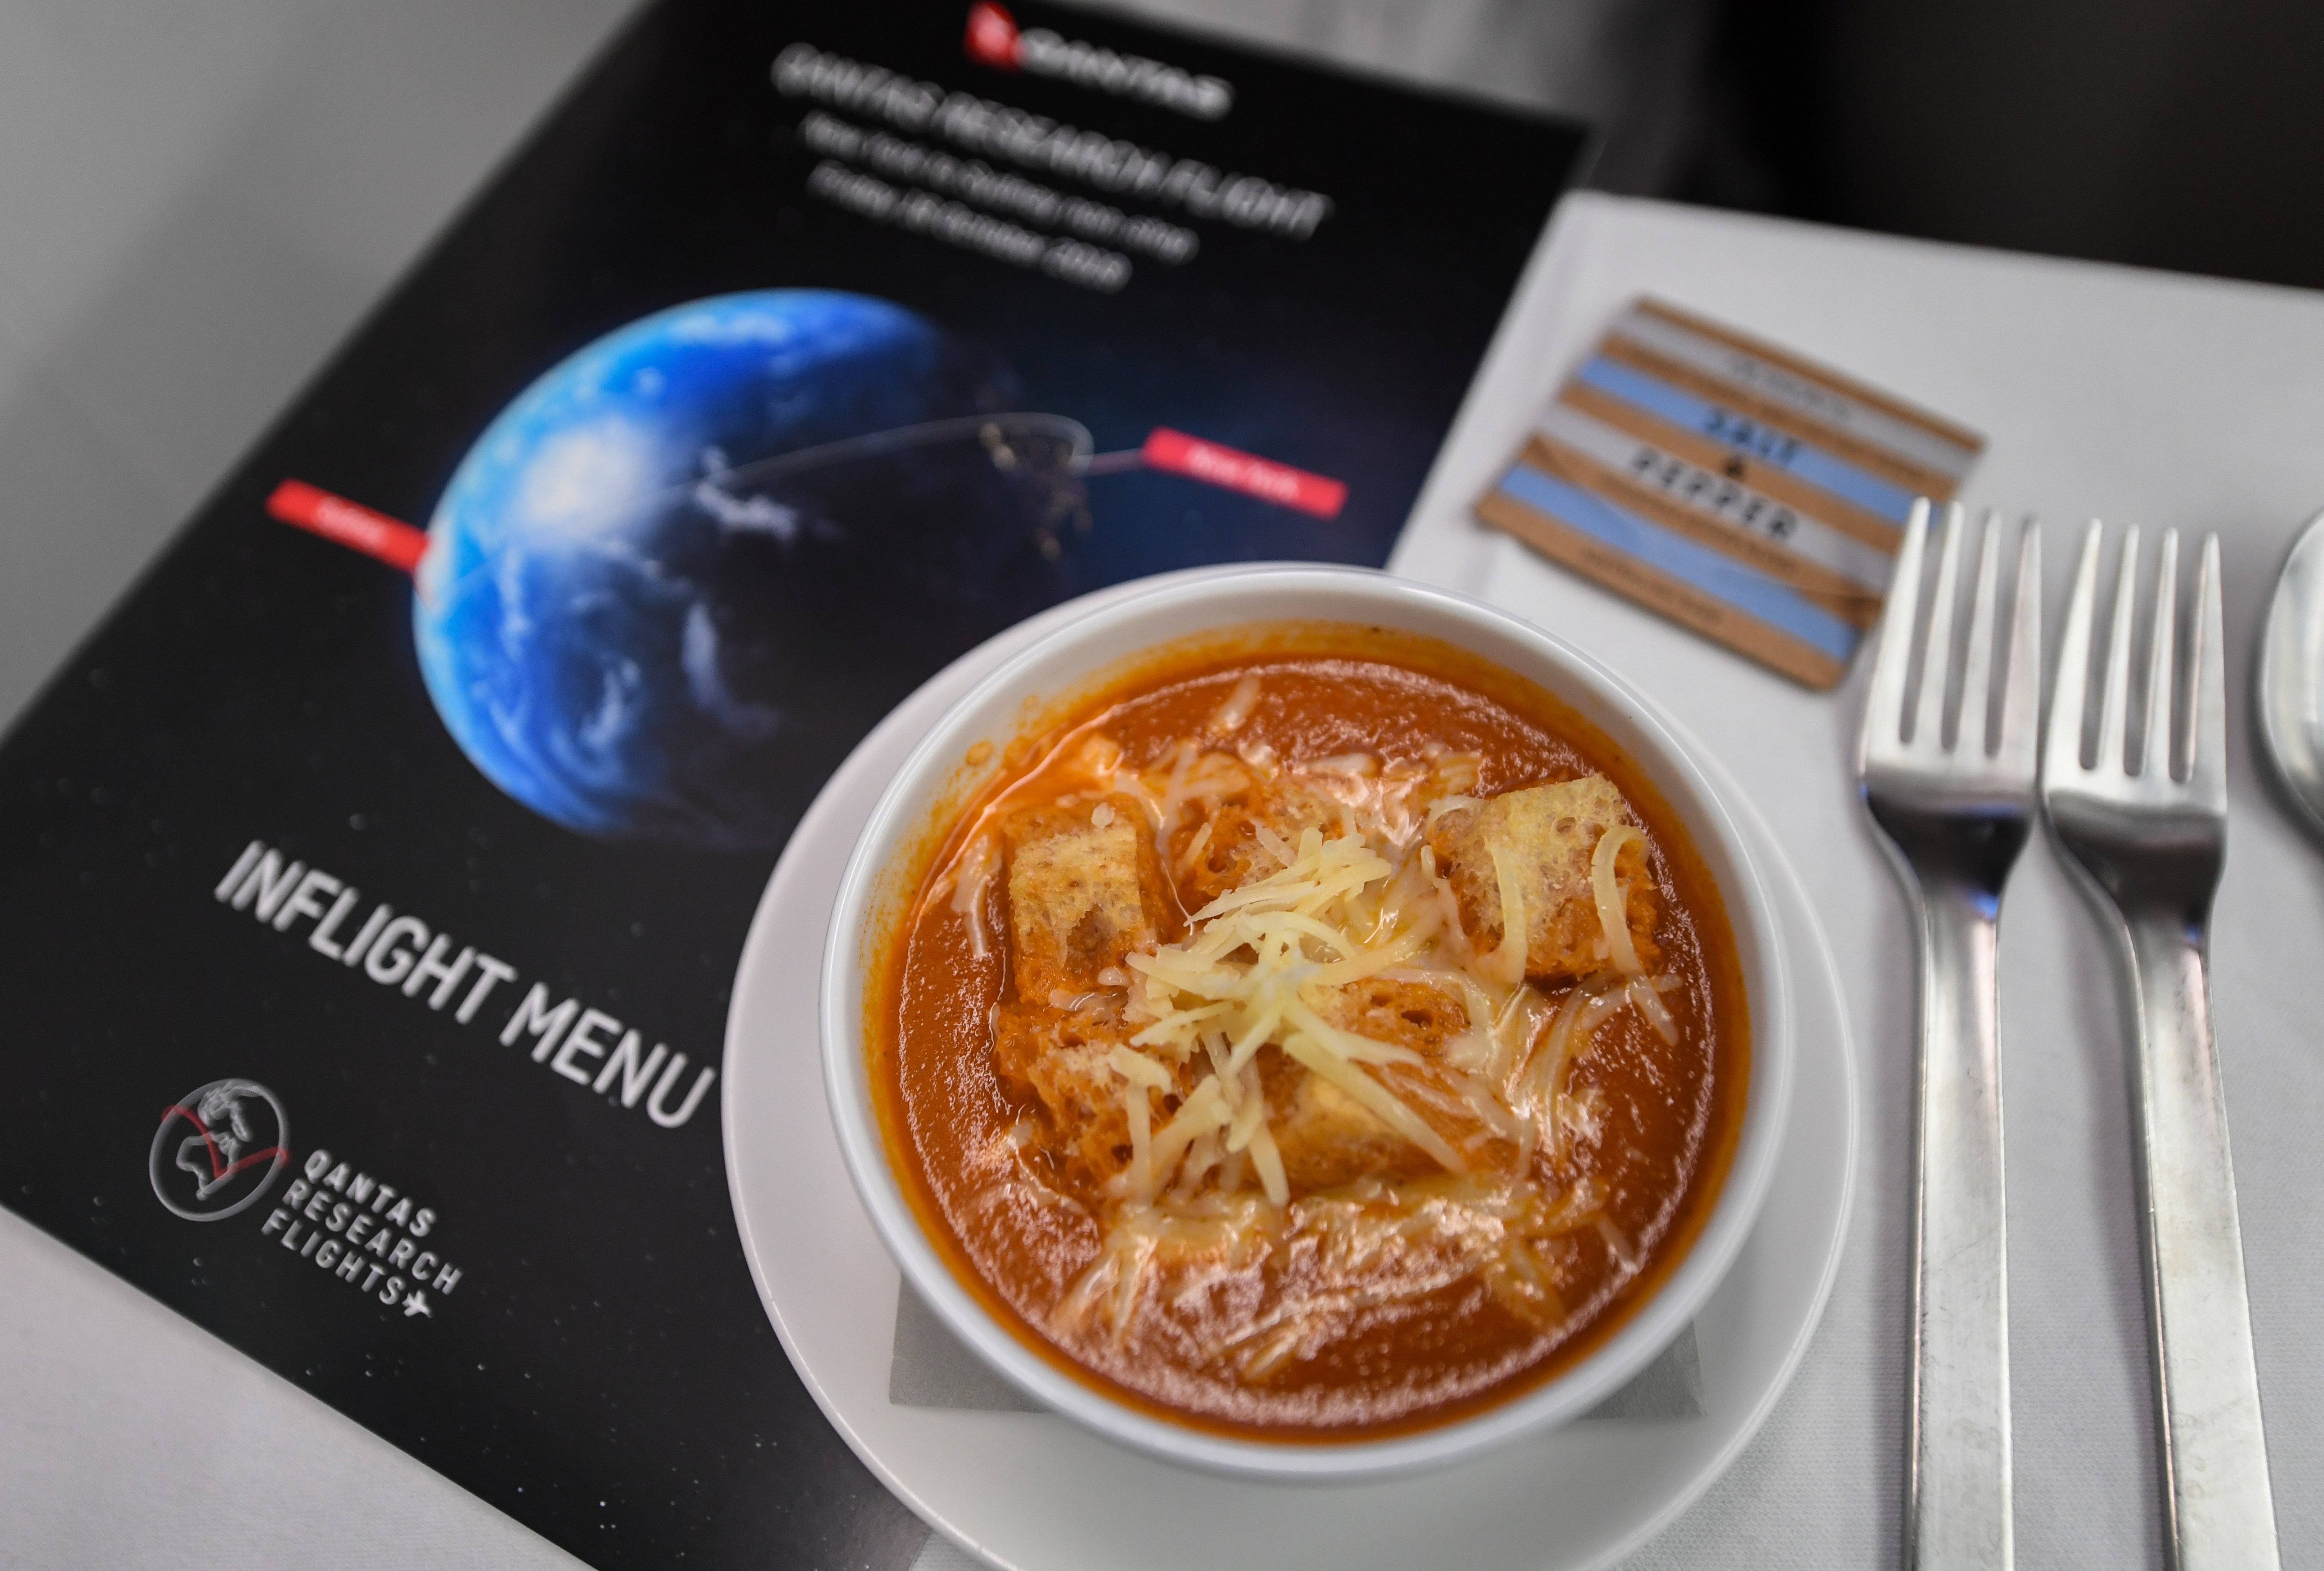 Food being served onboard QF7879 on Oct. 19, 2019 in Sydney, Australia. (James D. Morgan—Getty Images)